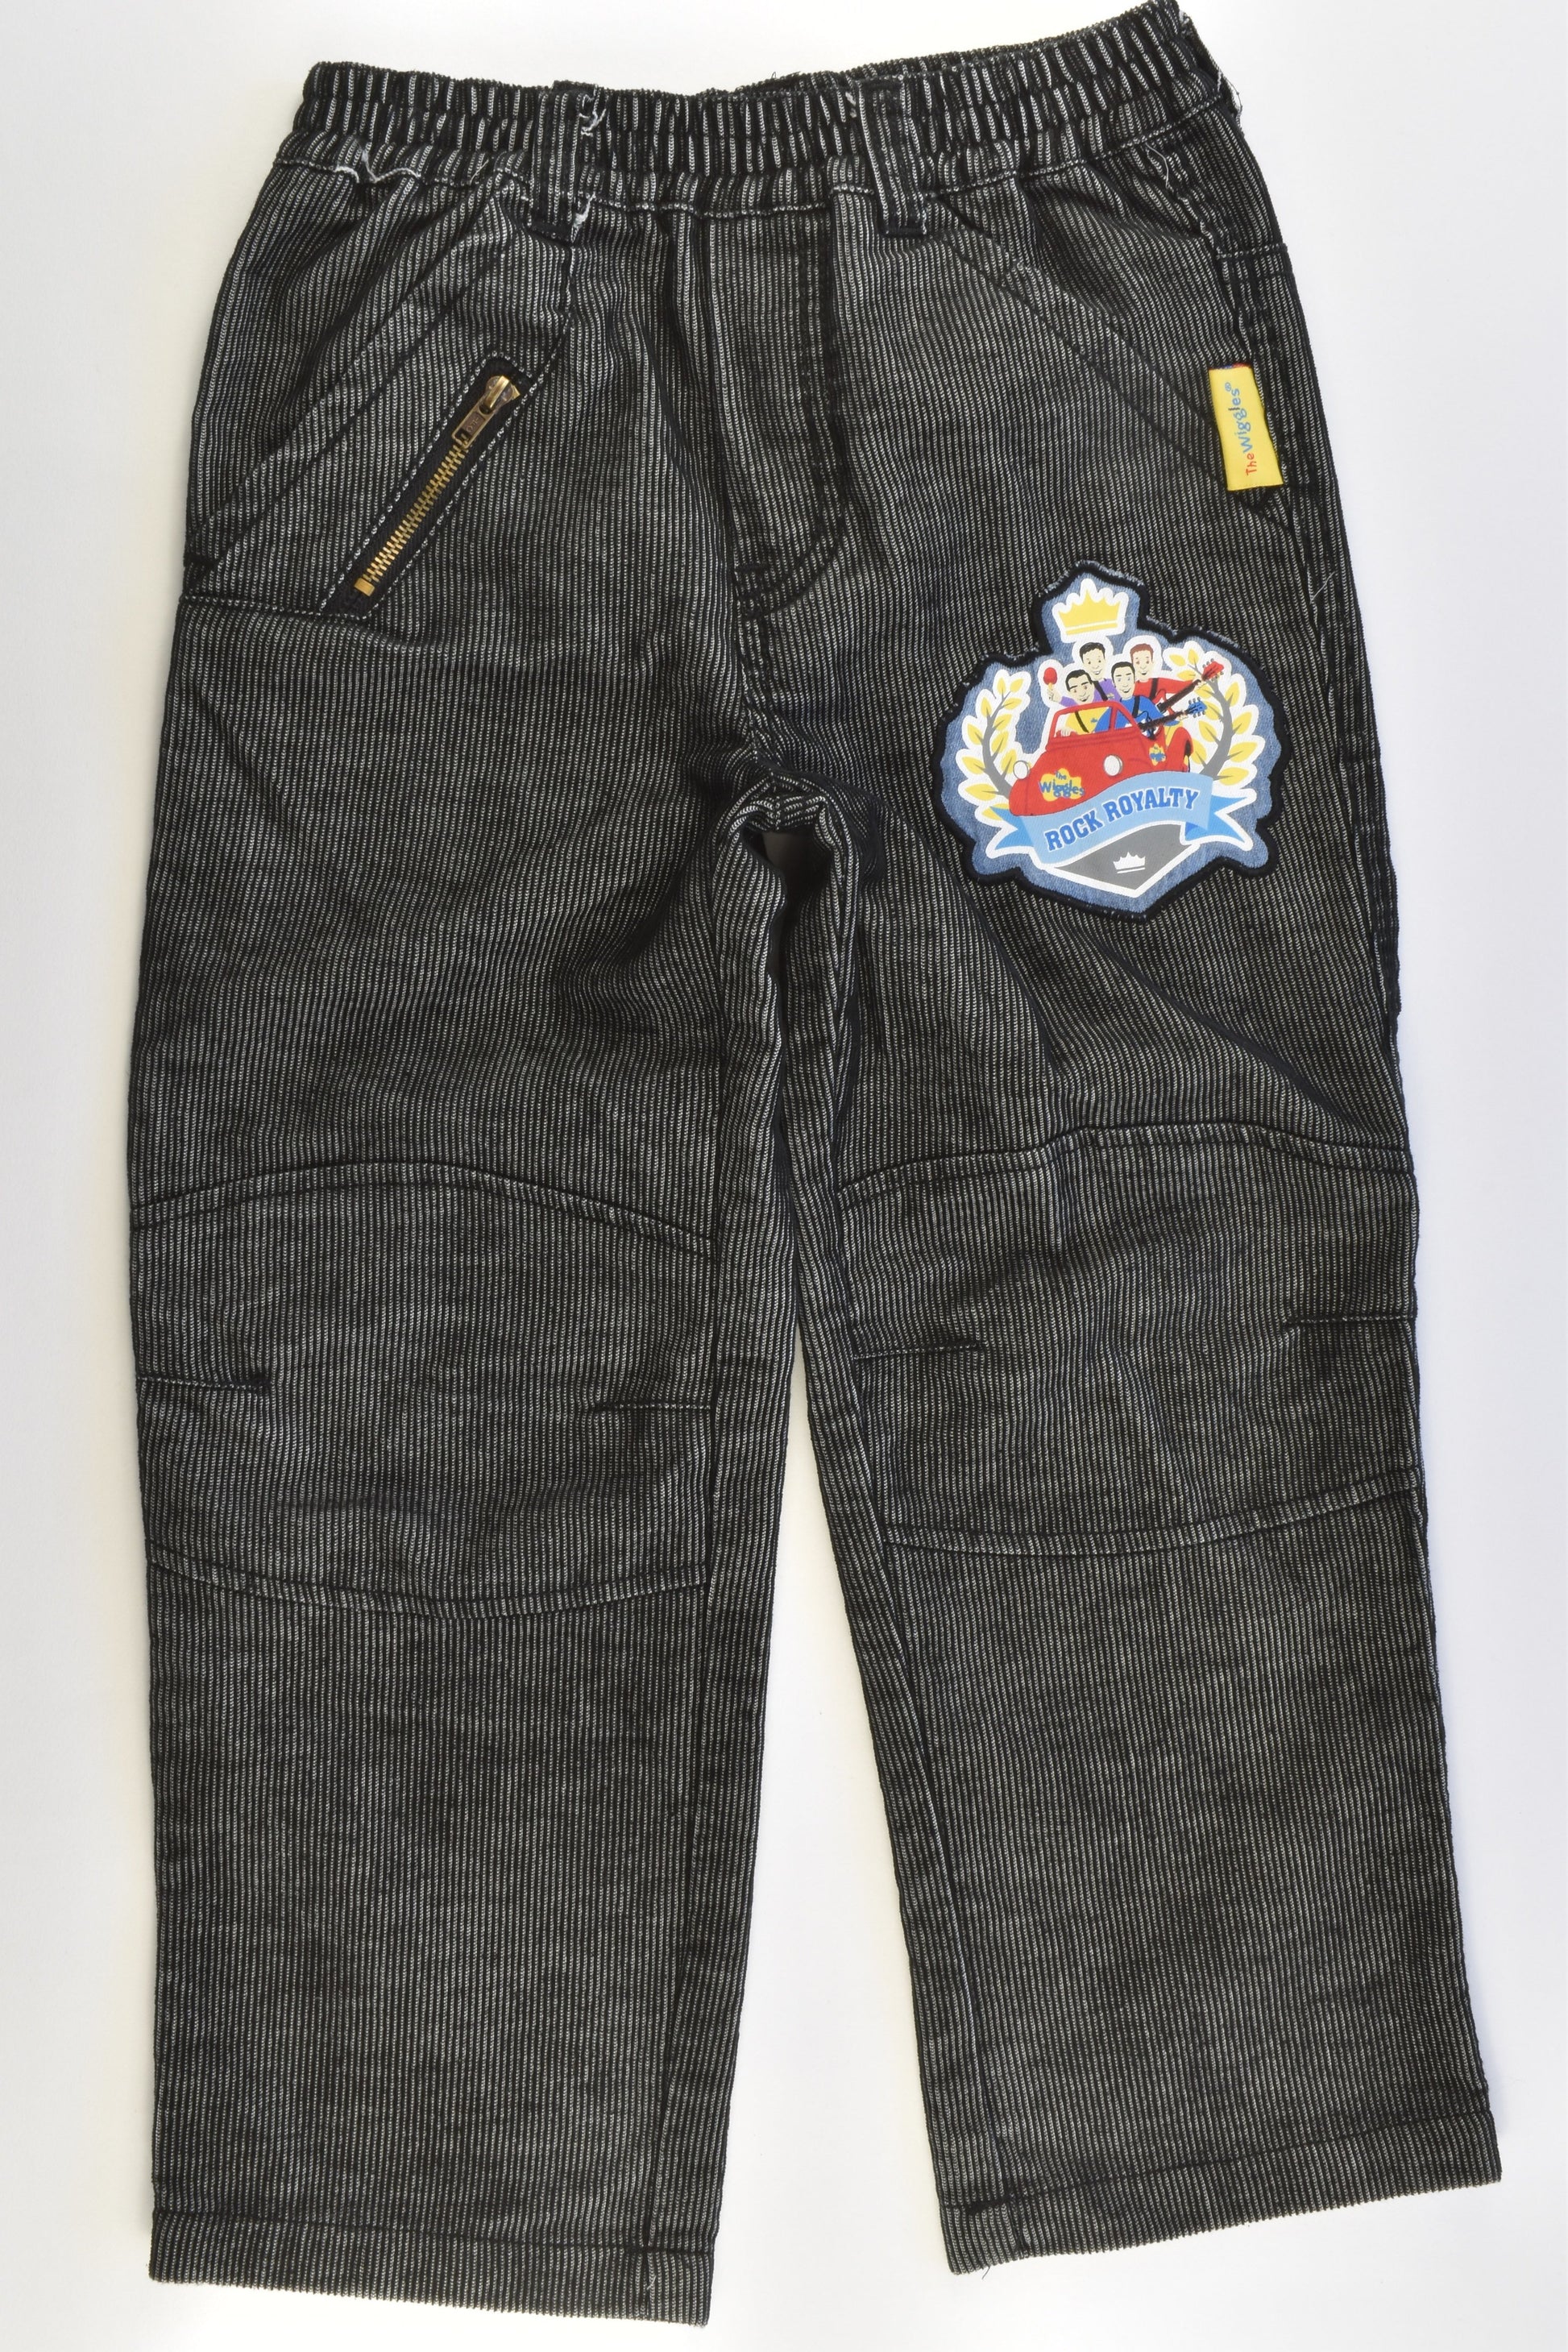 NEW The Wiggles Size 4 Cord Pants